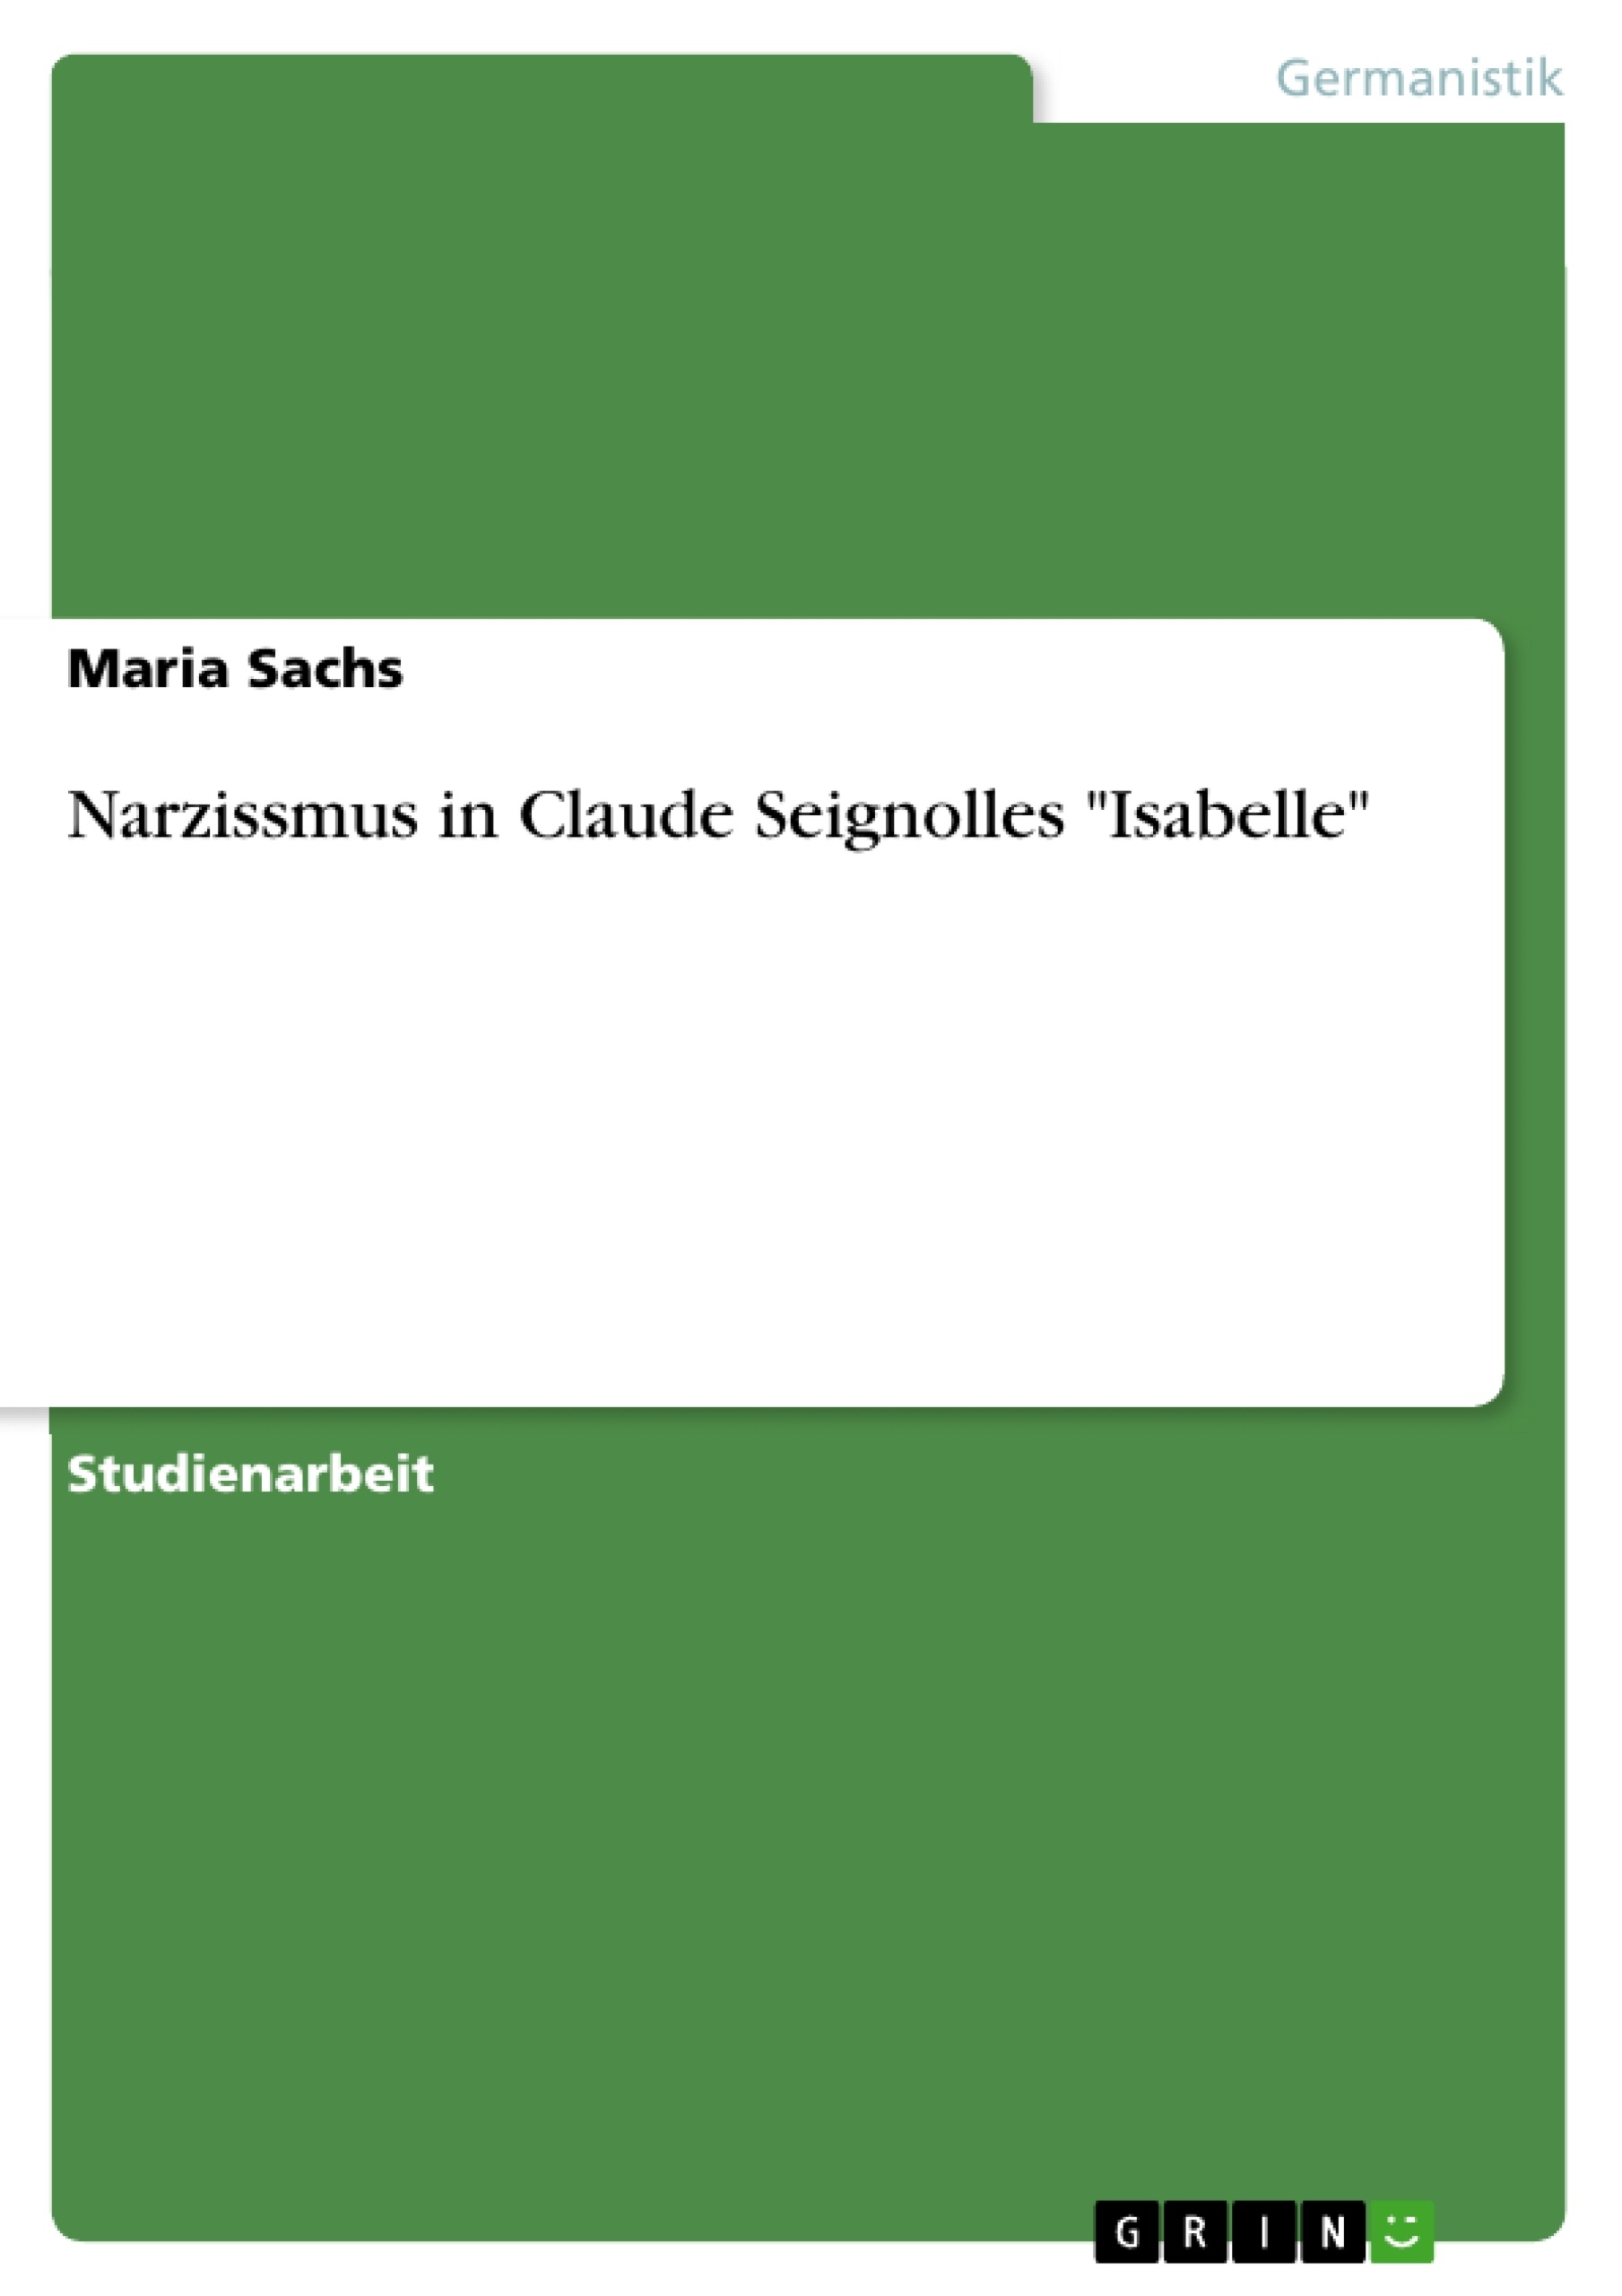 Title: Narzissmus in Claude Seignolles "Isabelle"